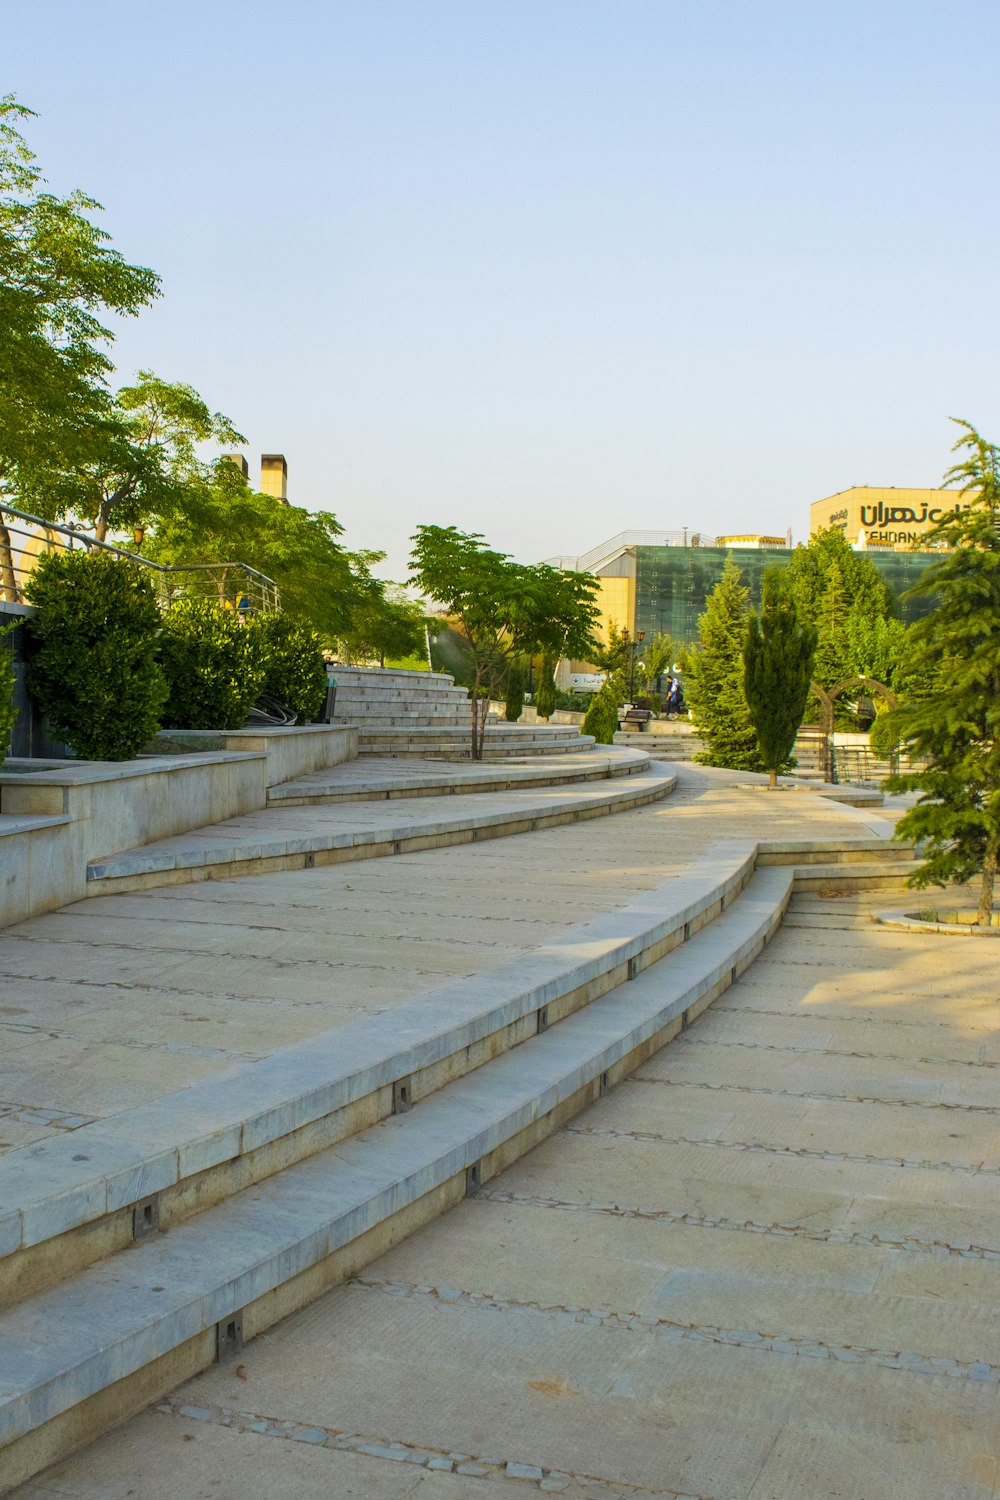 a stone walkway with trees and buildings